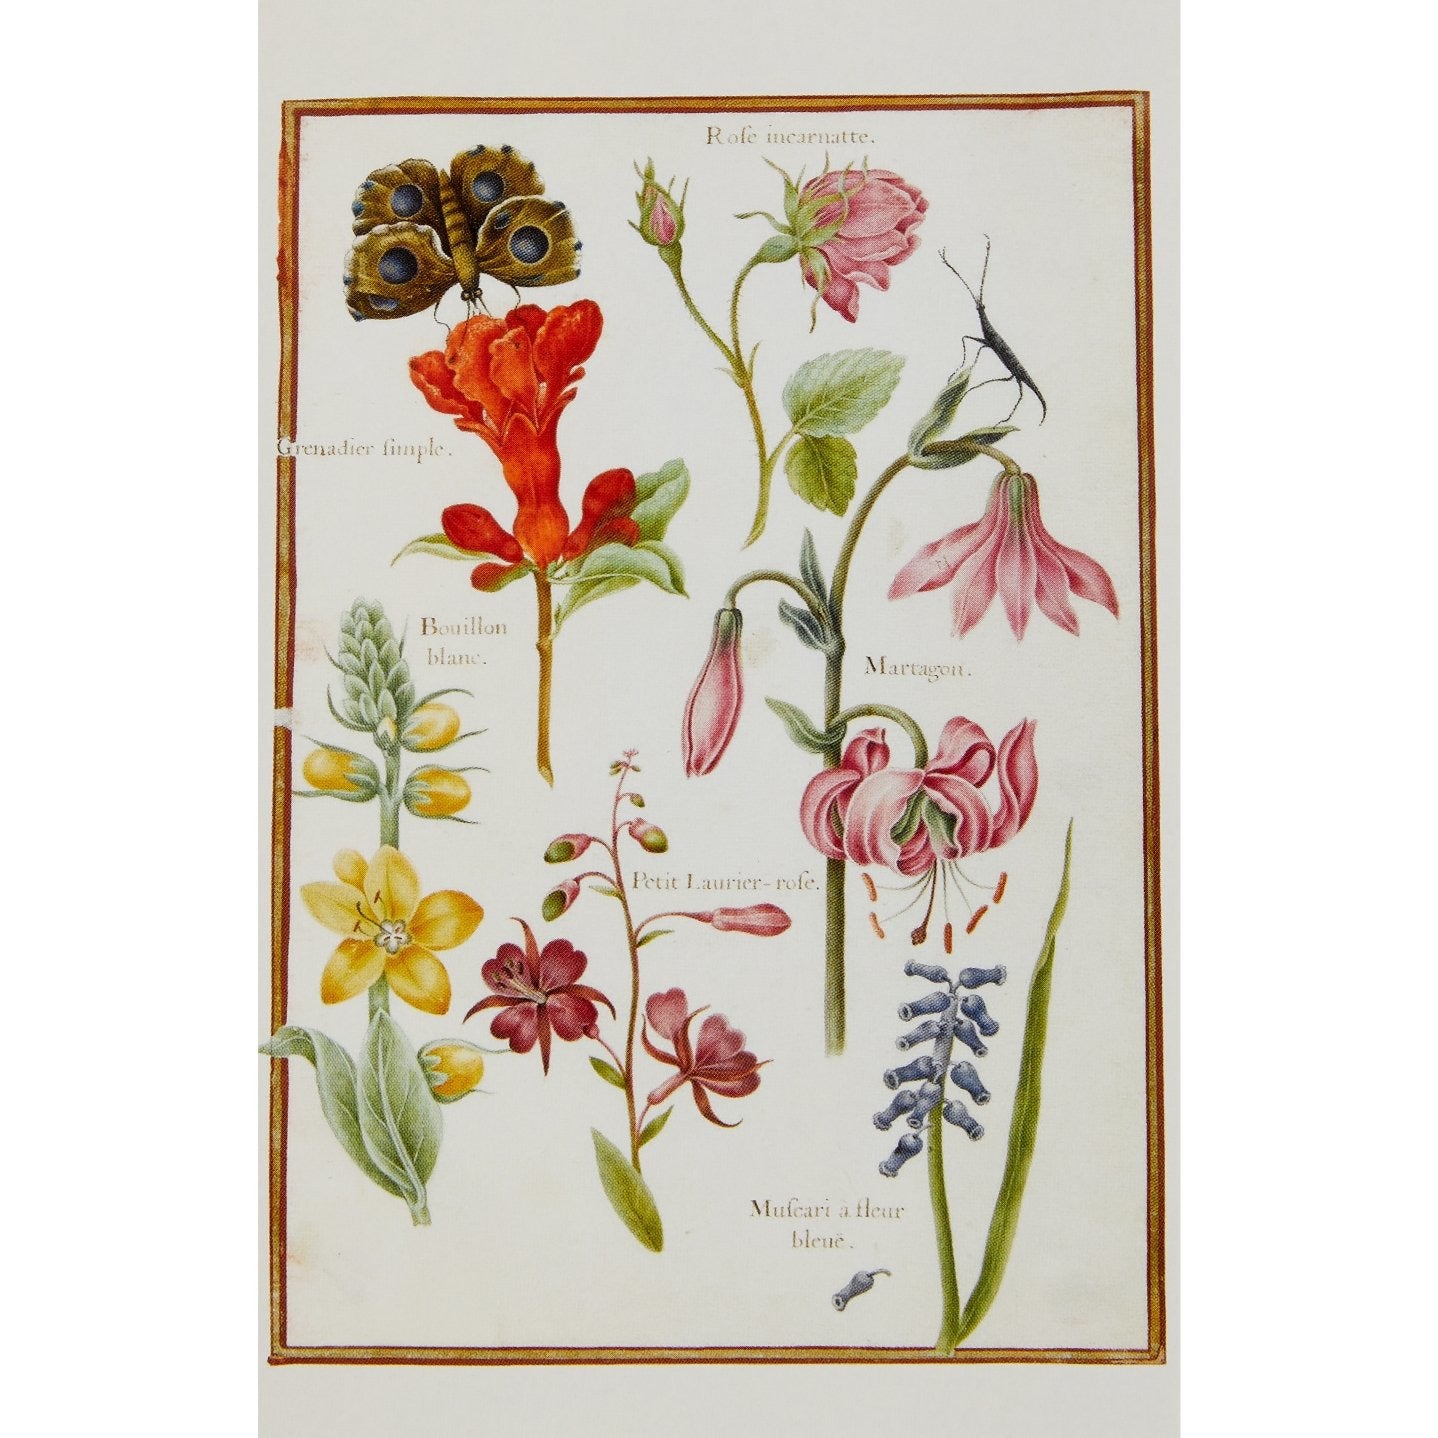 Notecard image - Flowers and Insects by Nicolas Robert.From the Broughton collection of the Fitzwilliam Museum, brought to you by CuratingCambridge.co.uk 